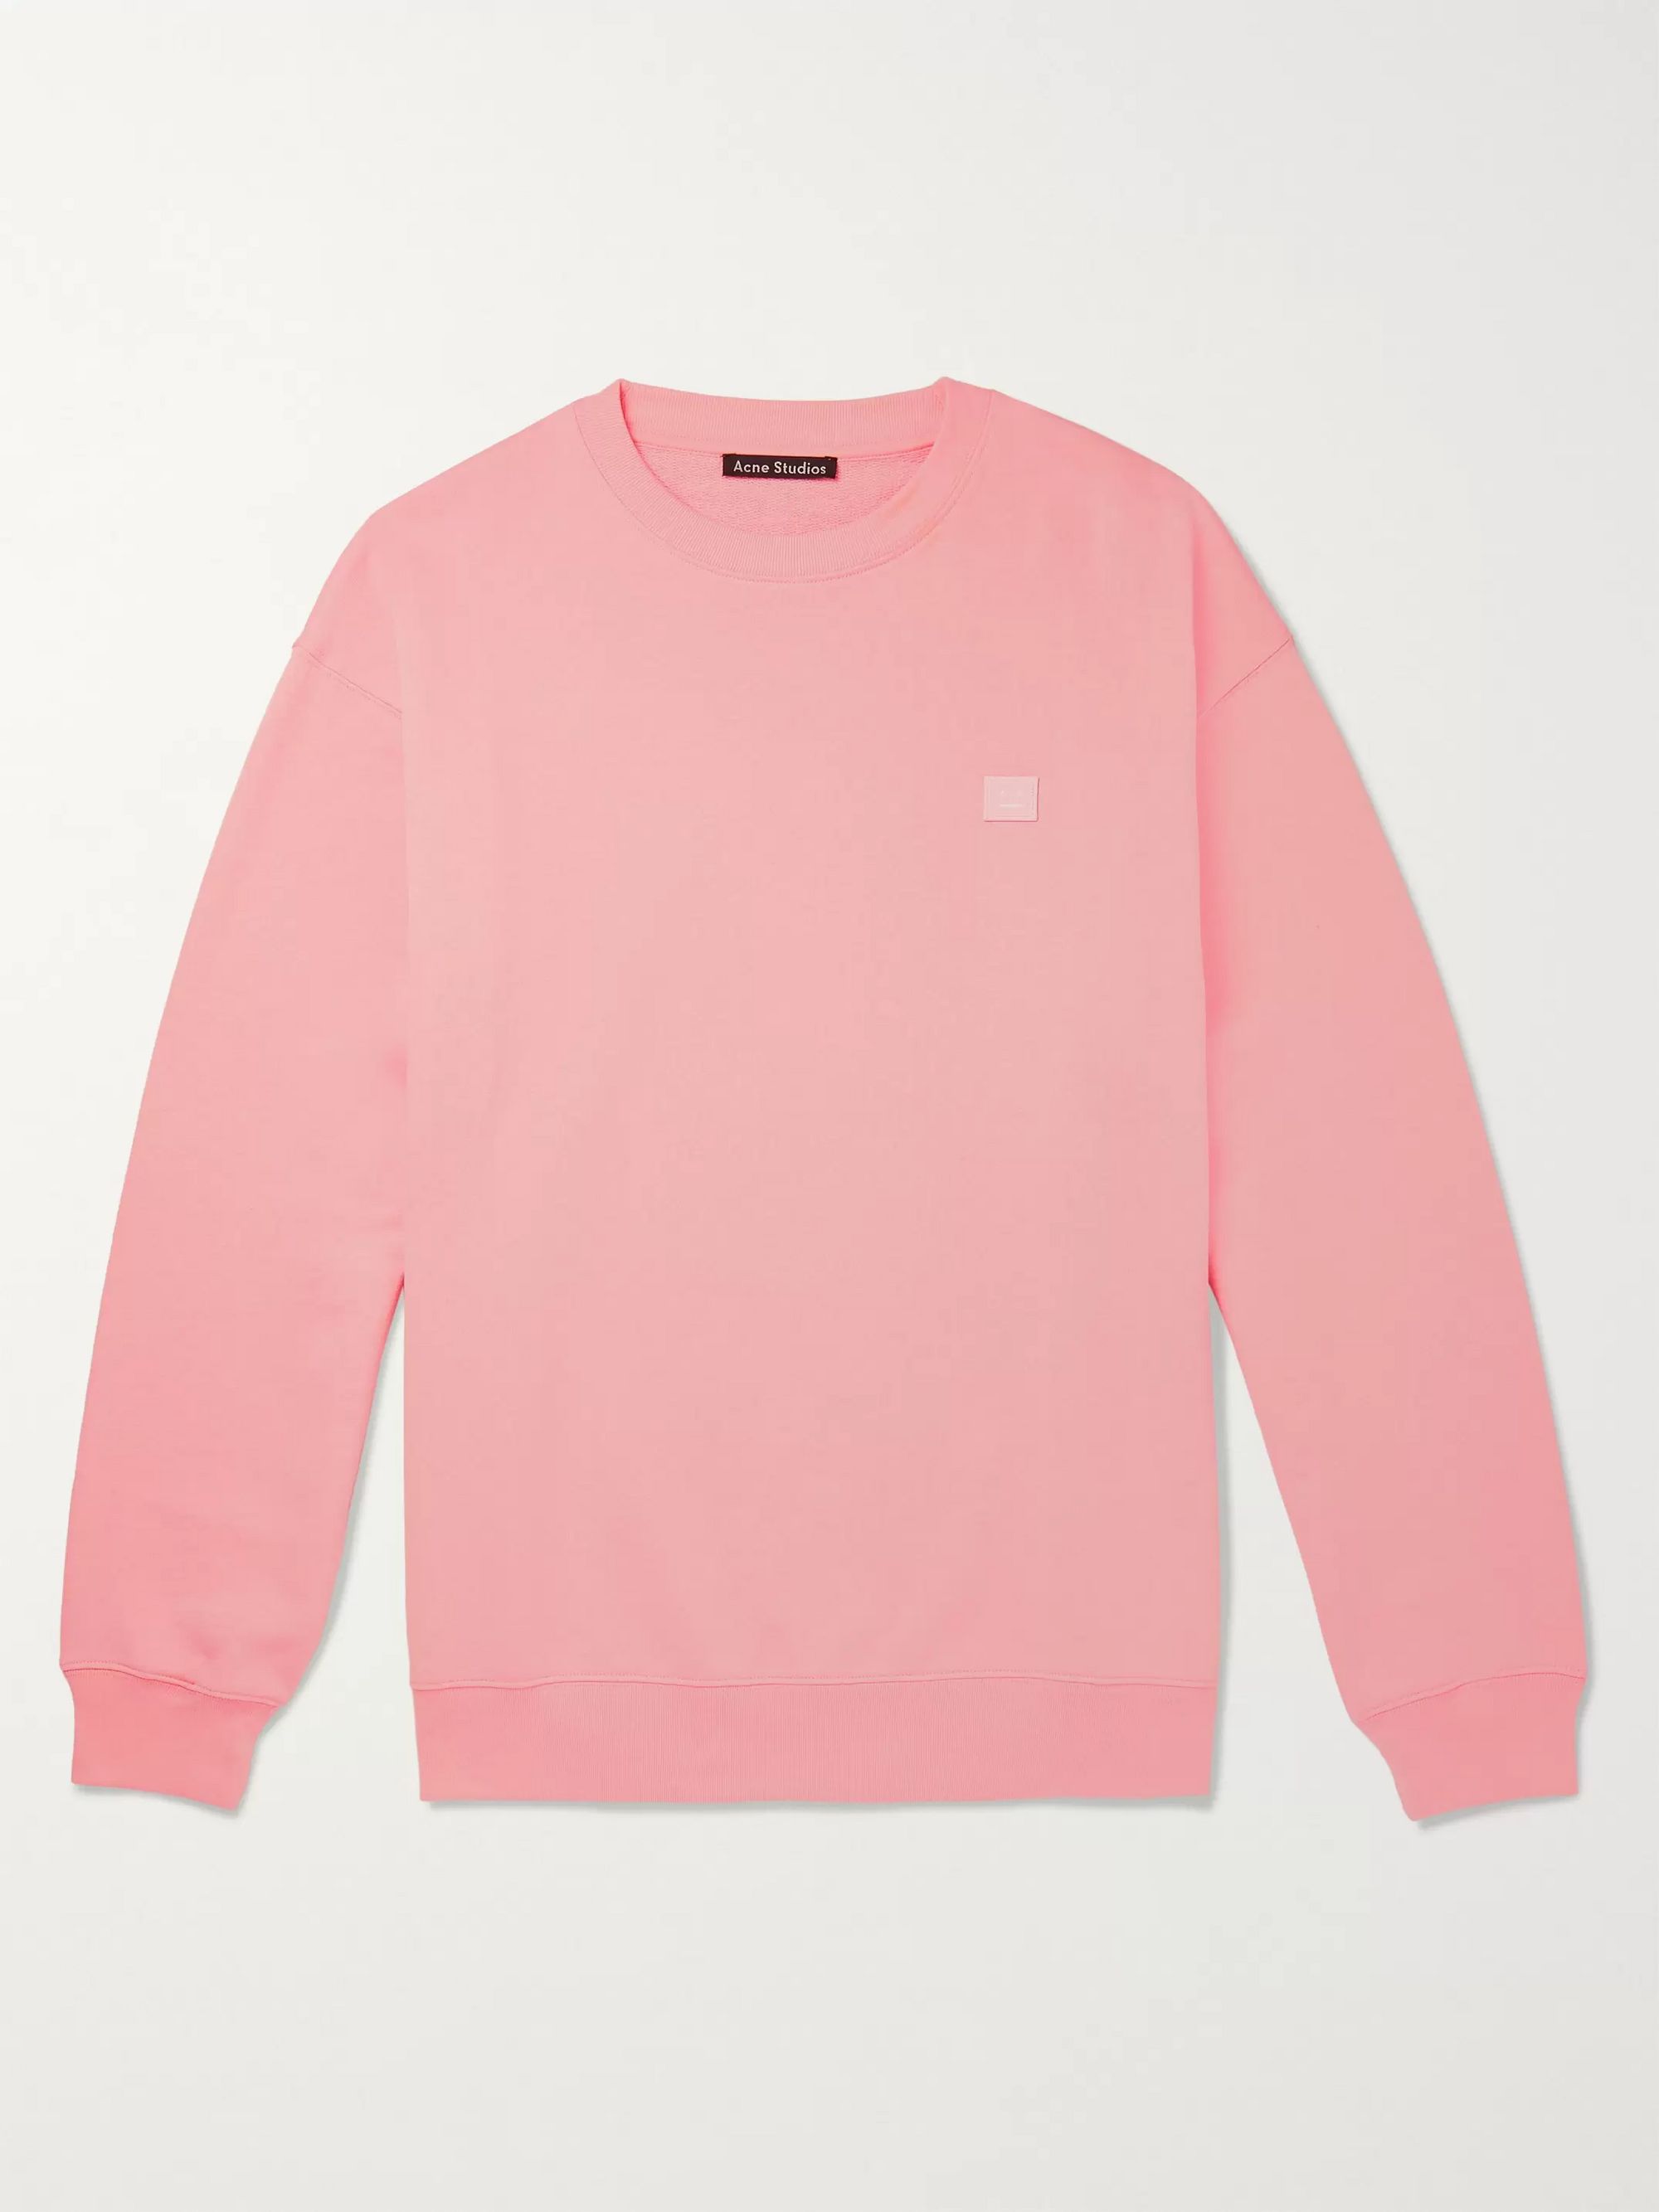 View Acne Studios Sweater Pictures - Acne problems